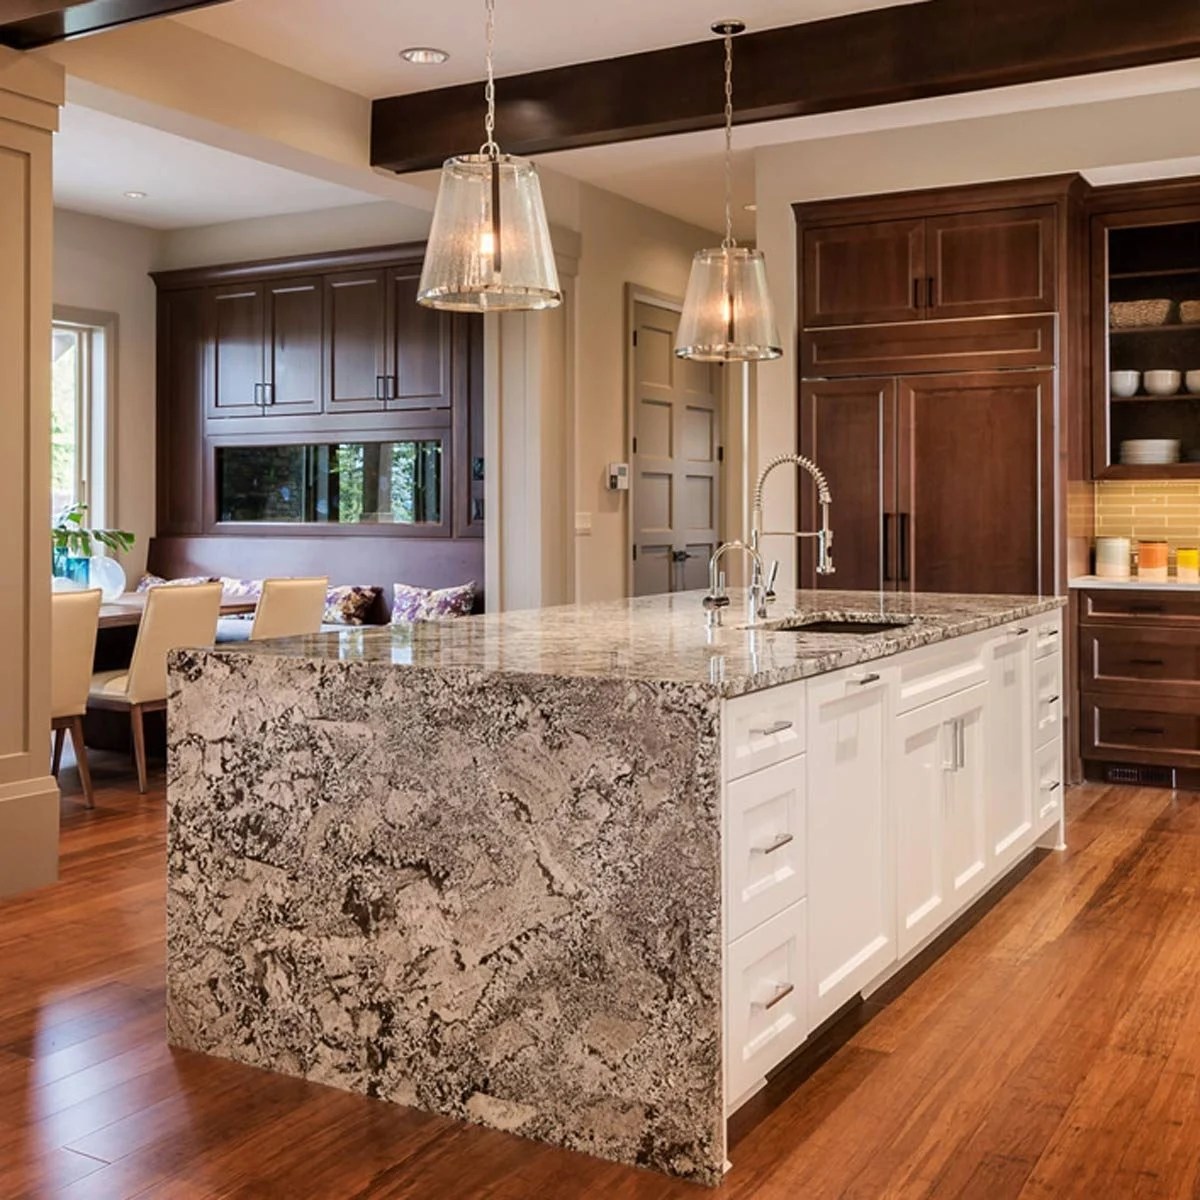 Choosing the Right Countertops for Your Modular Kitchen